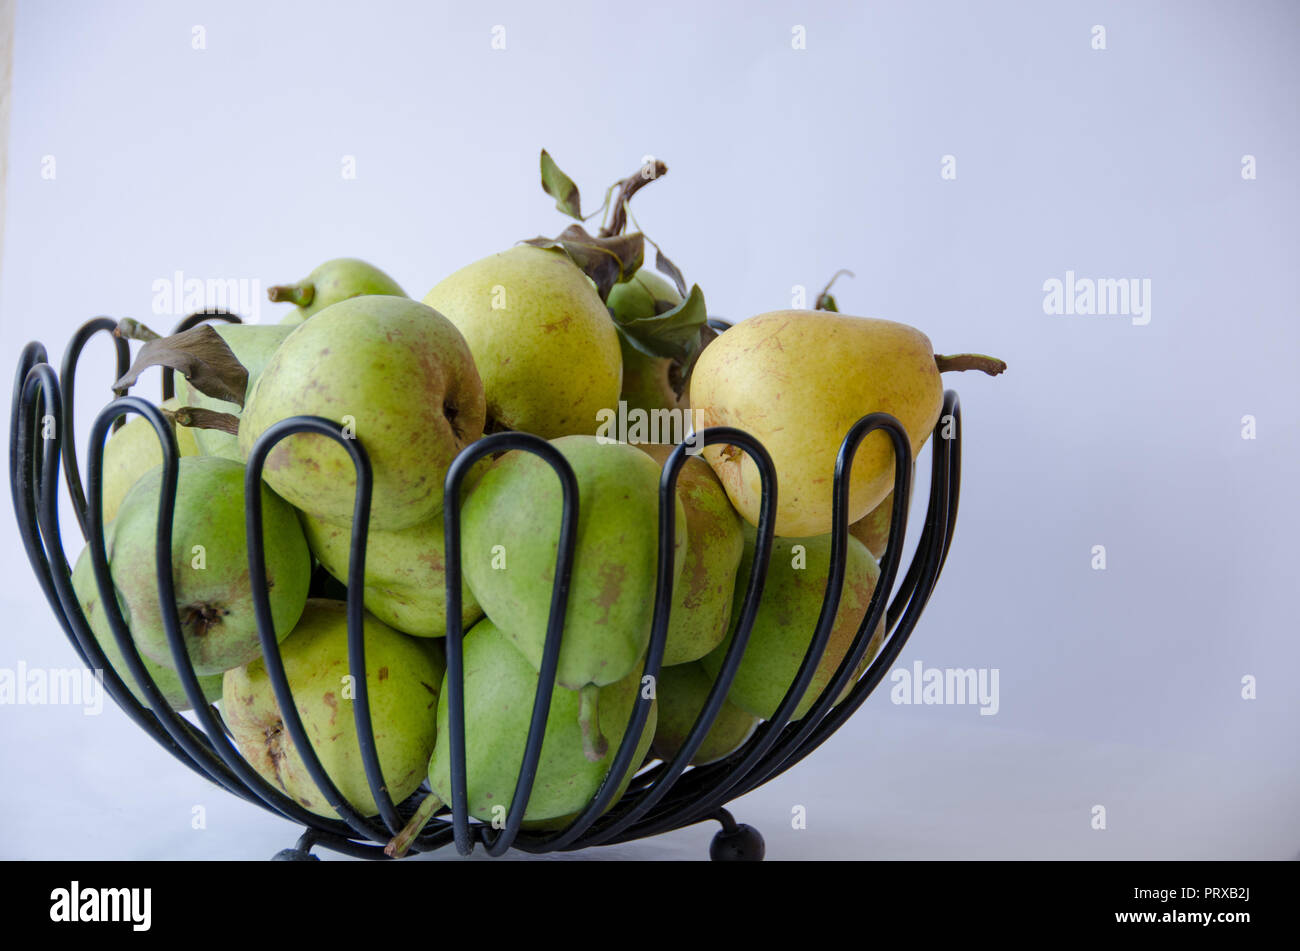 A group of handpicked pears during autumn in a decorative fruitbowl Stock Photo